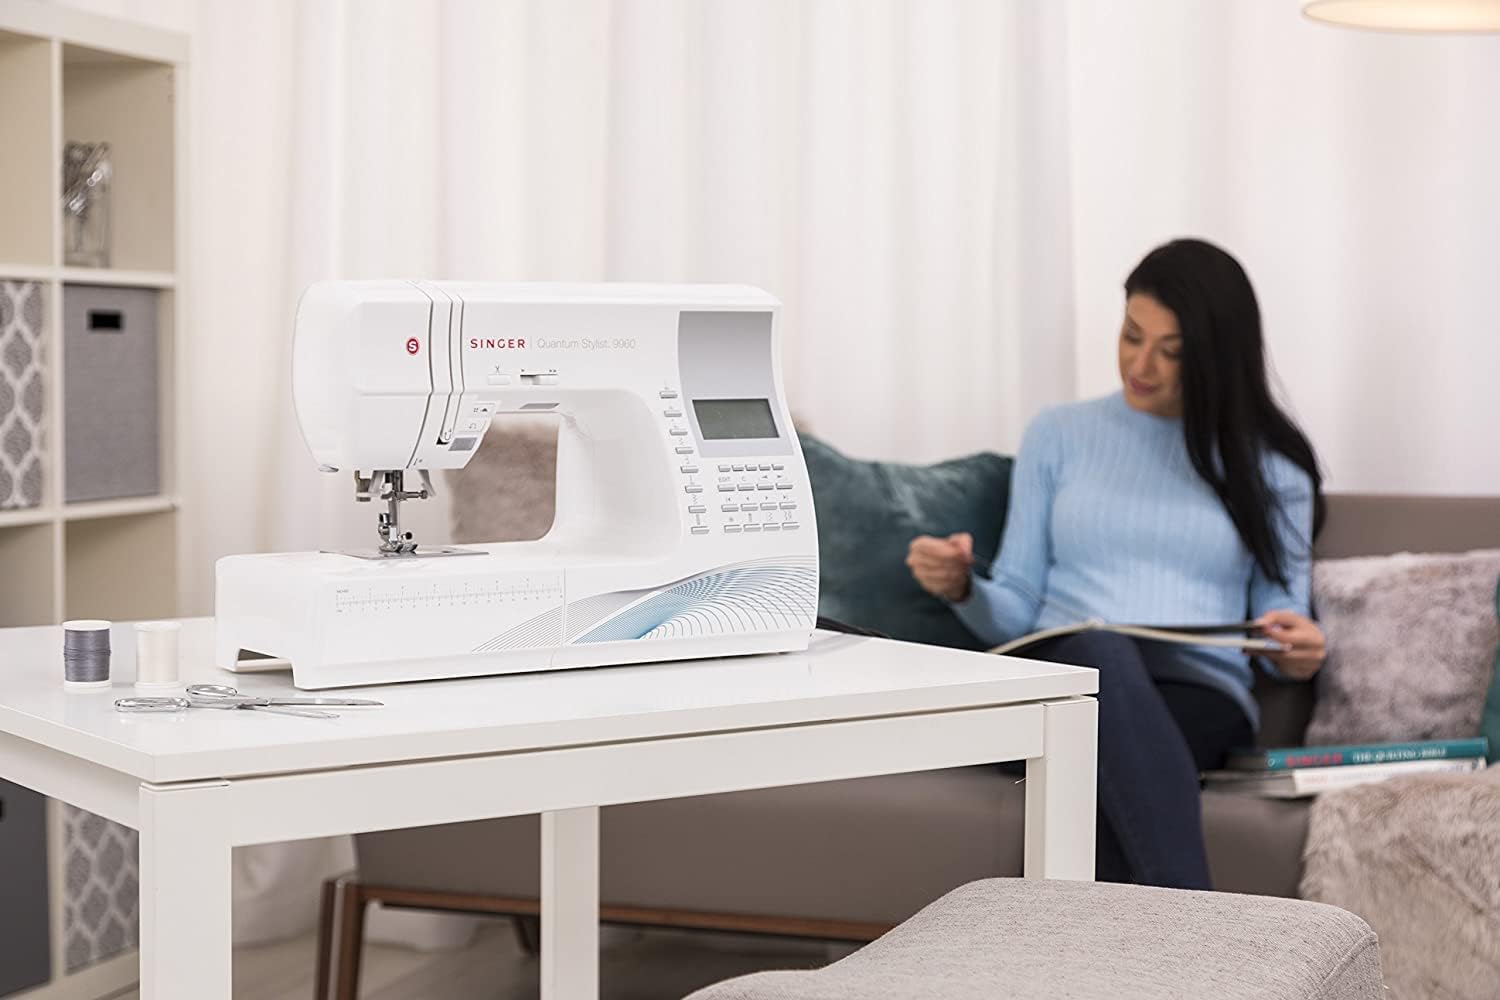 SINGER 9985 Sewing Machine Review